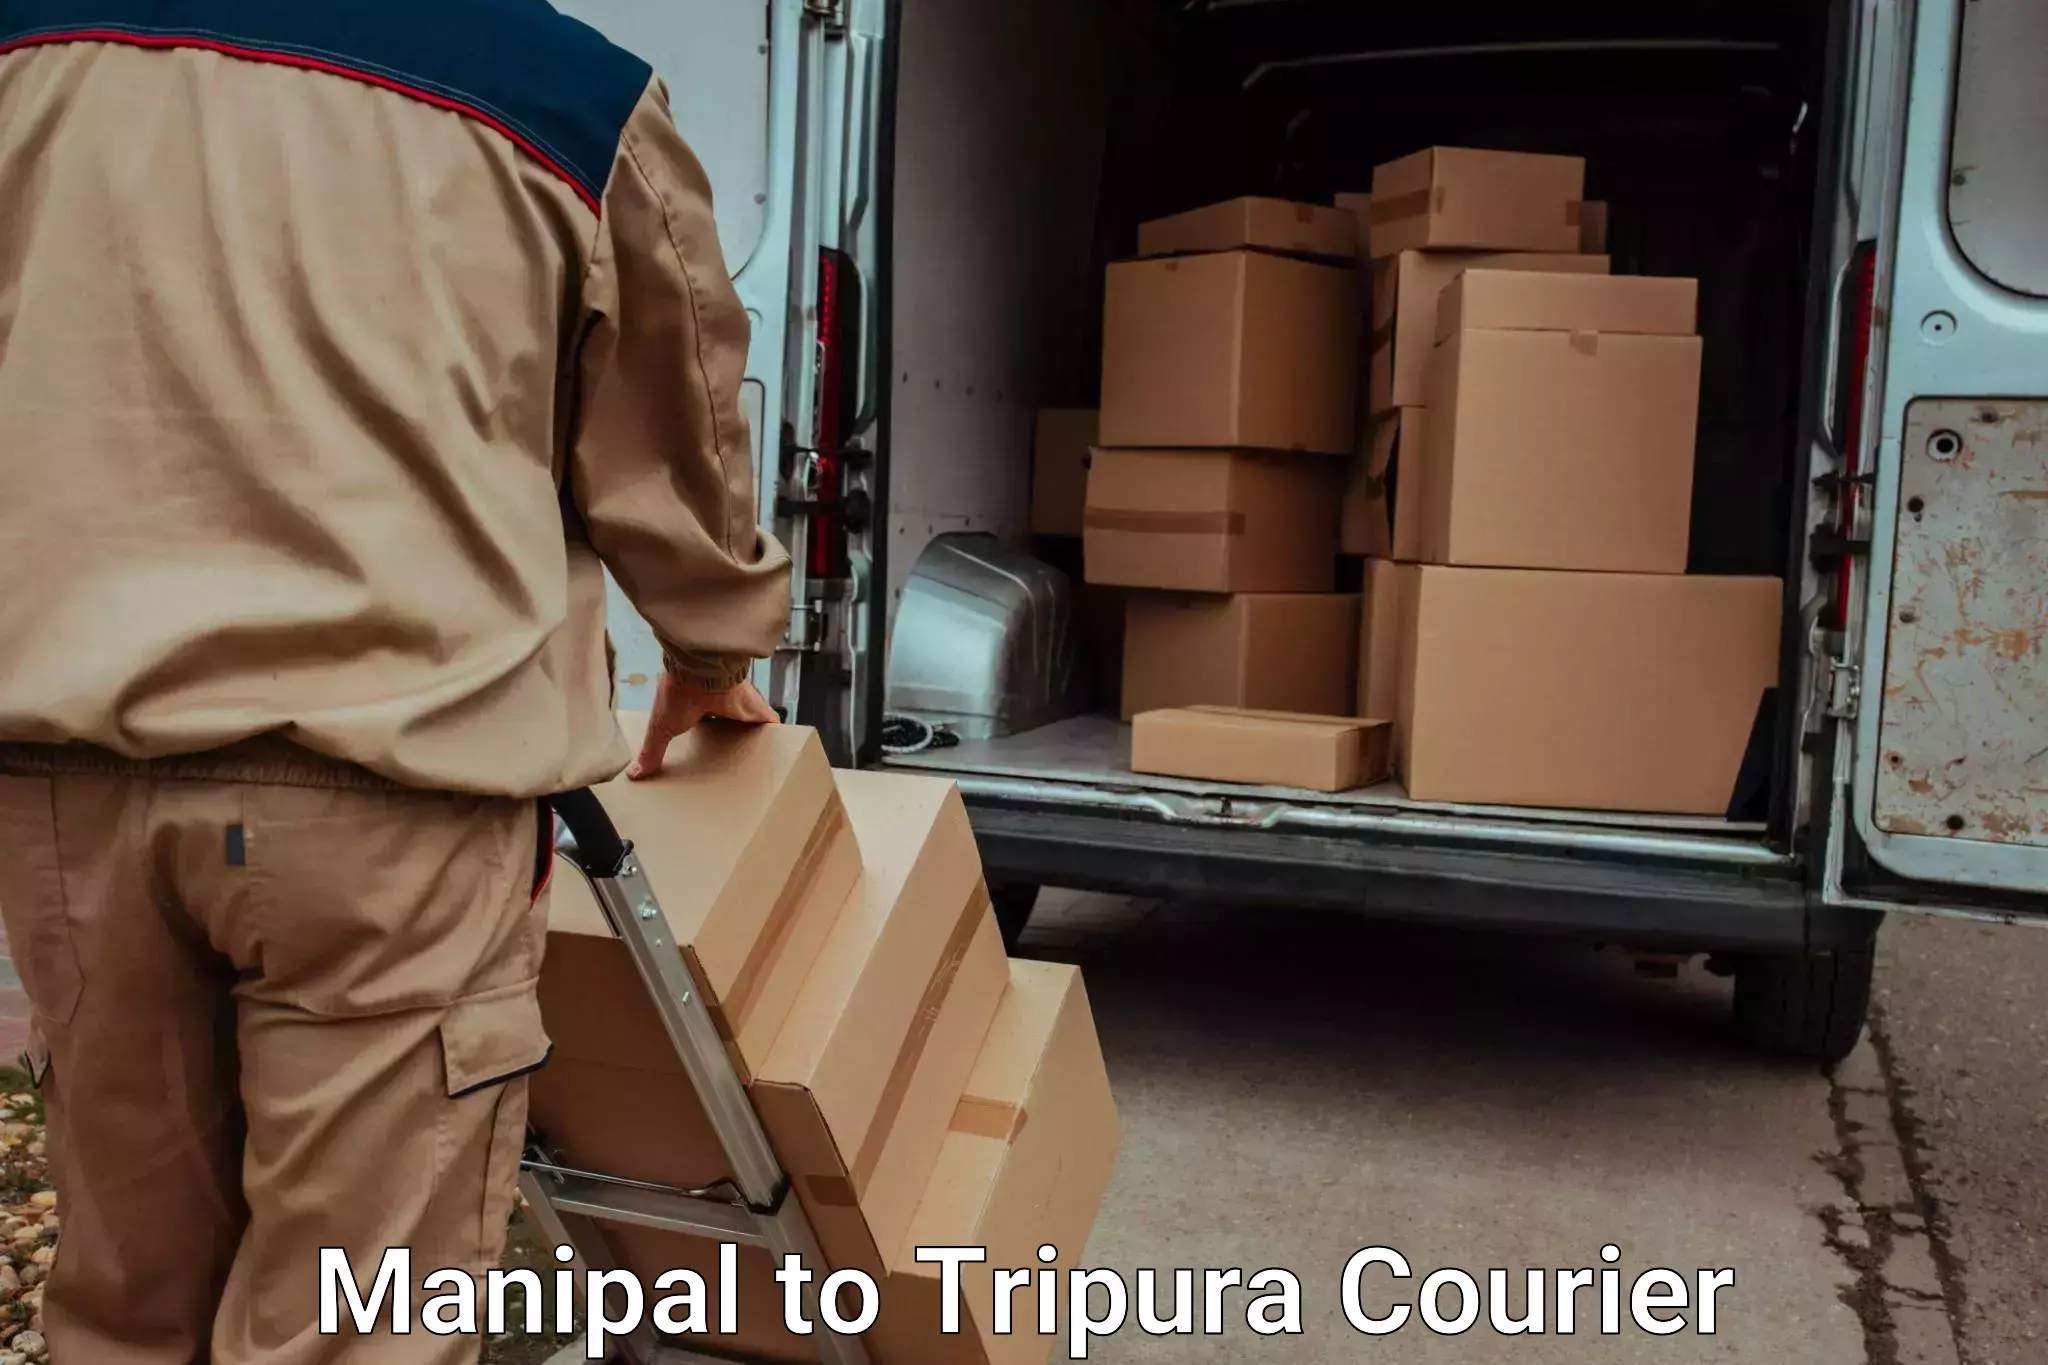 Luggage transport deals Manipal to Udaipur Tripura